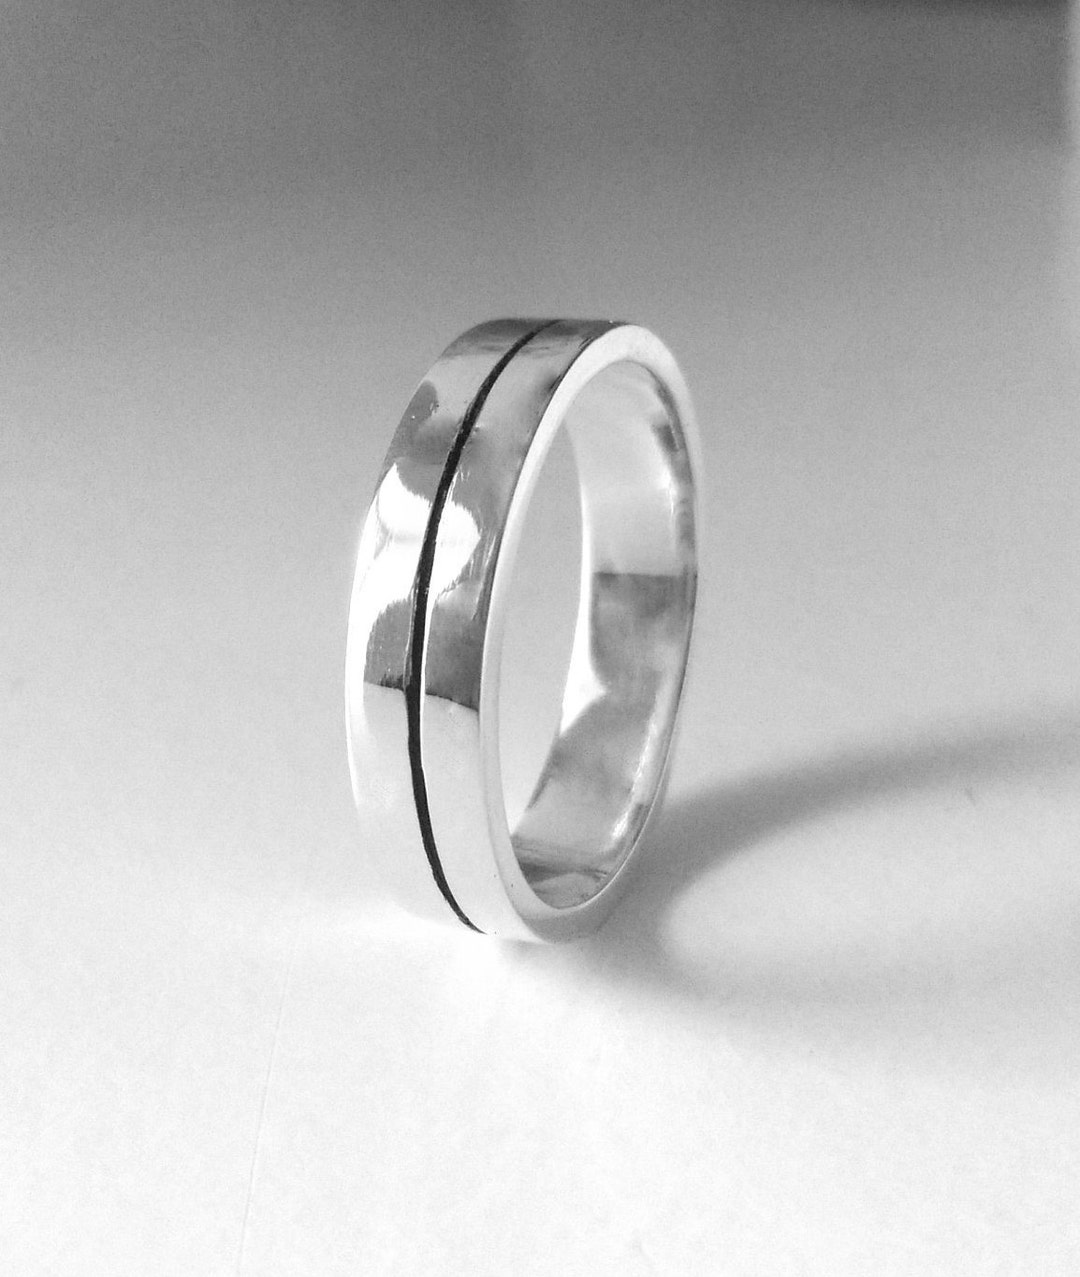 Buy Solid Pure Zirconium Ring Black Heat Oxidized Grooves. Mens Ring. Mens  Jewelry. Thumb Ring. Online in India - Etsy